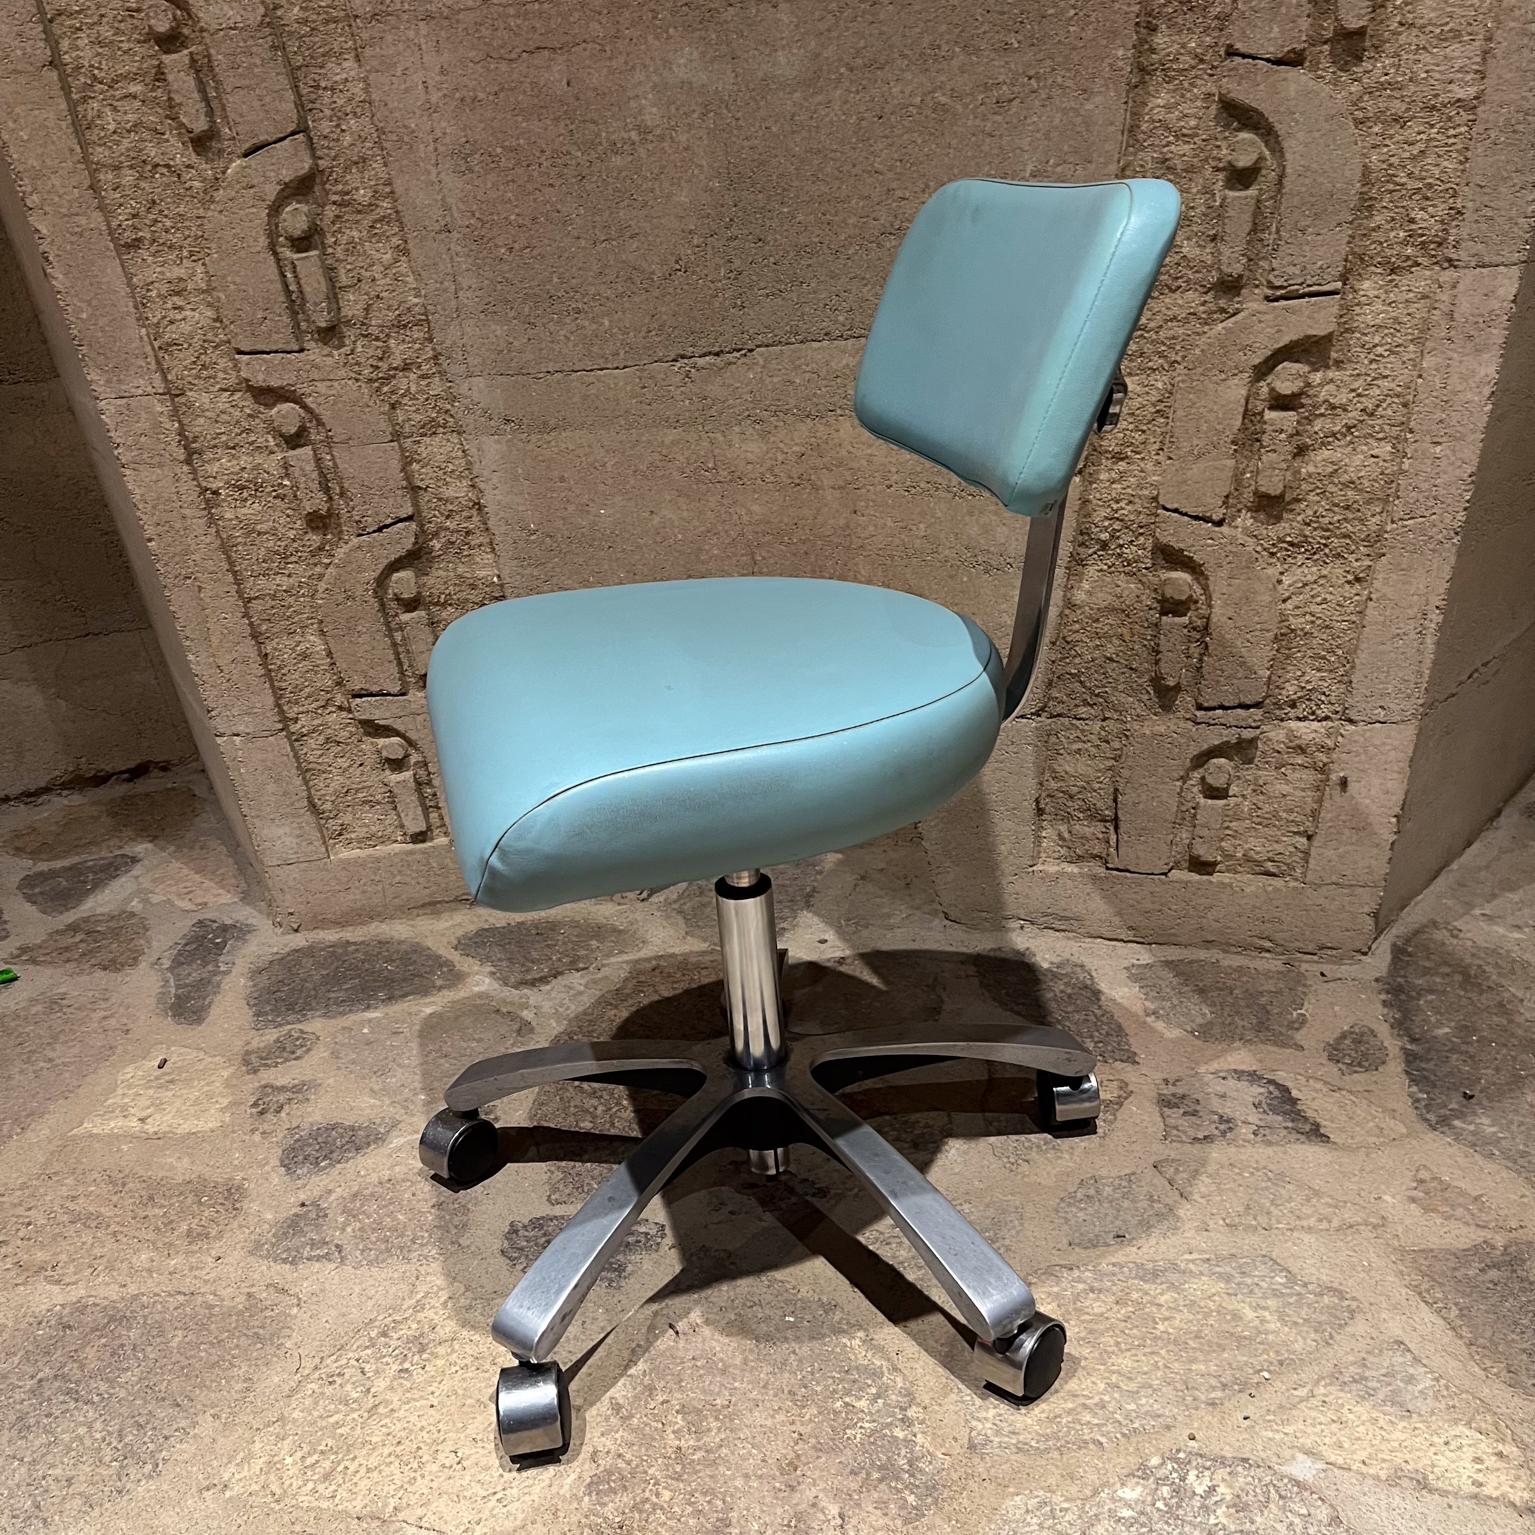 1970s Deluxe Brewer Desk Chair Doctor Stool Del Tube Corp In Good Condition For Sale In Chula Vista, CA